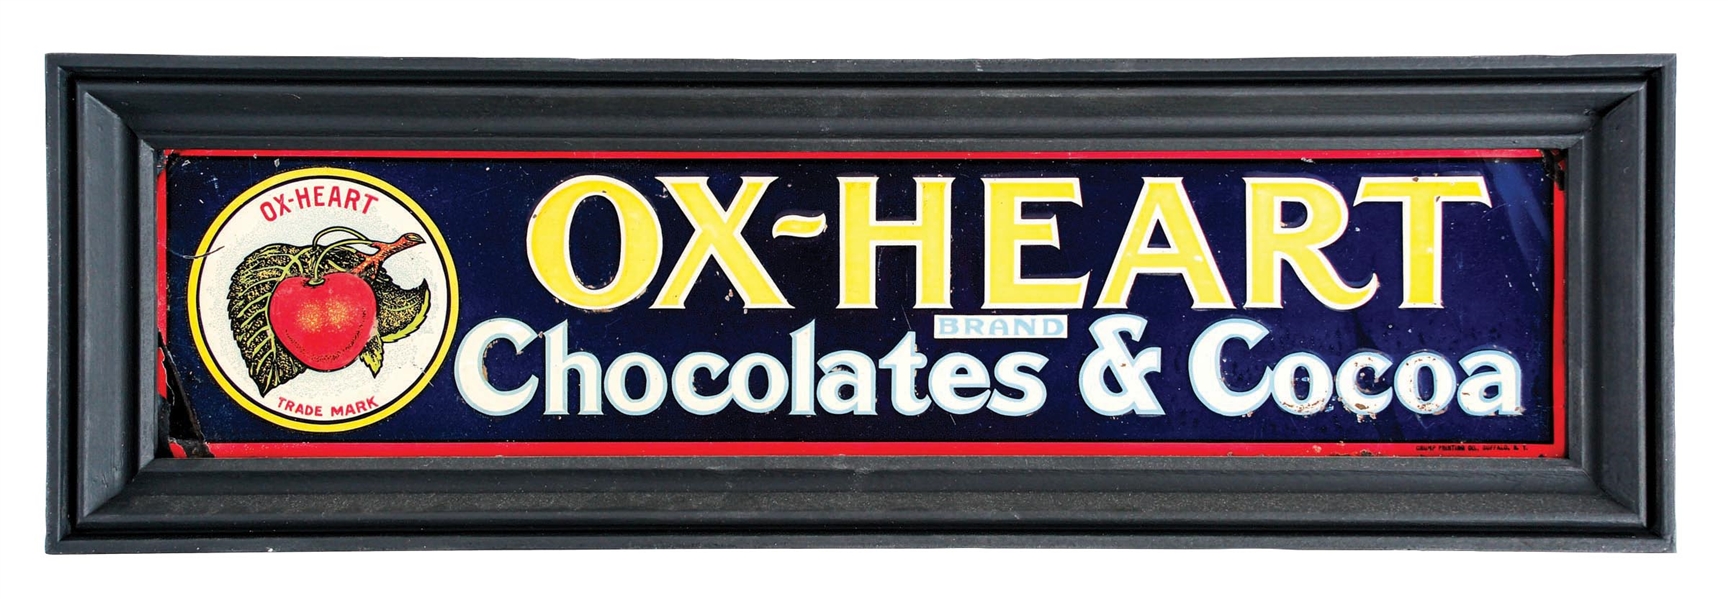 FRAMED OX-HEART CHOCOLATES EMBOSSED TIN SIGN